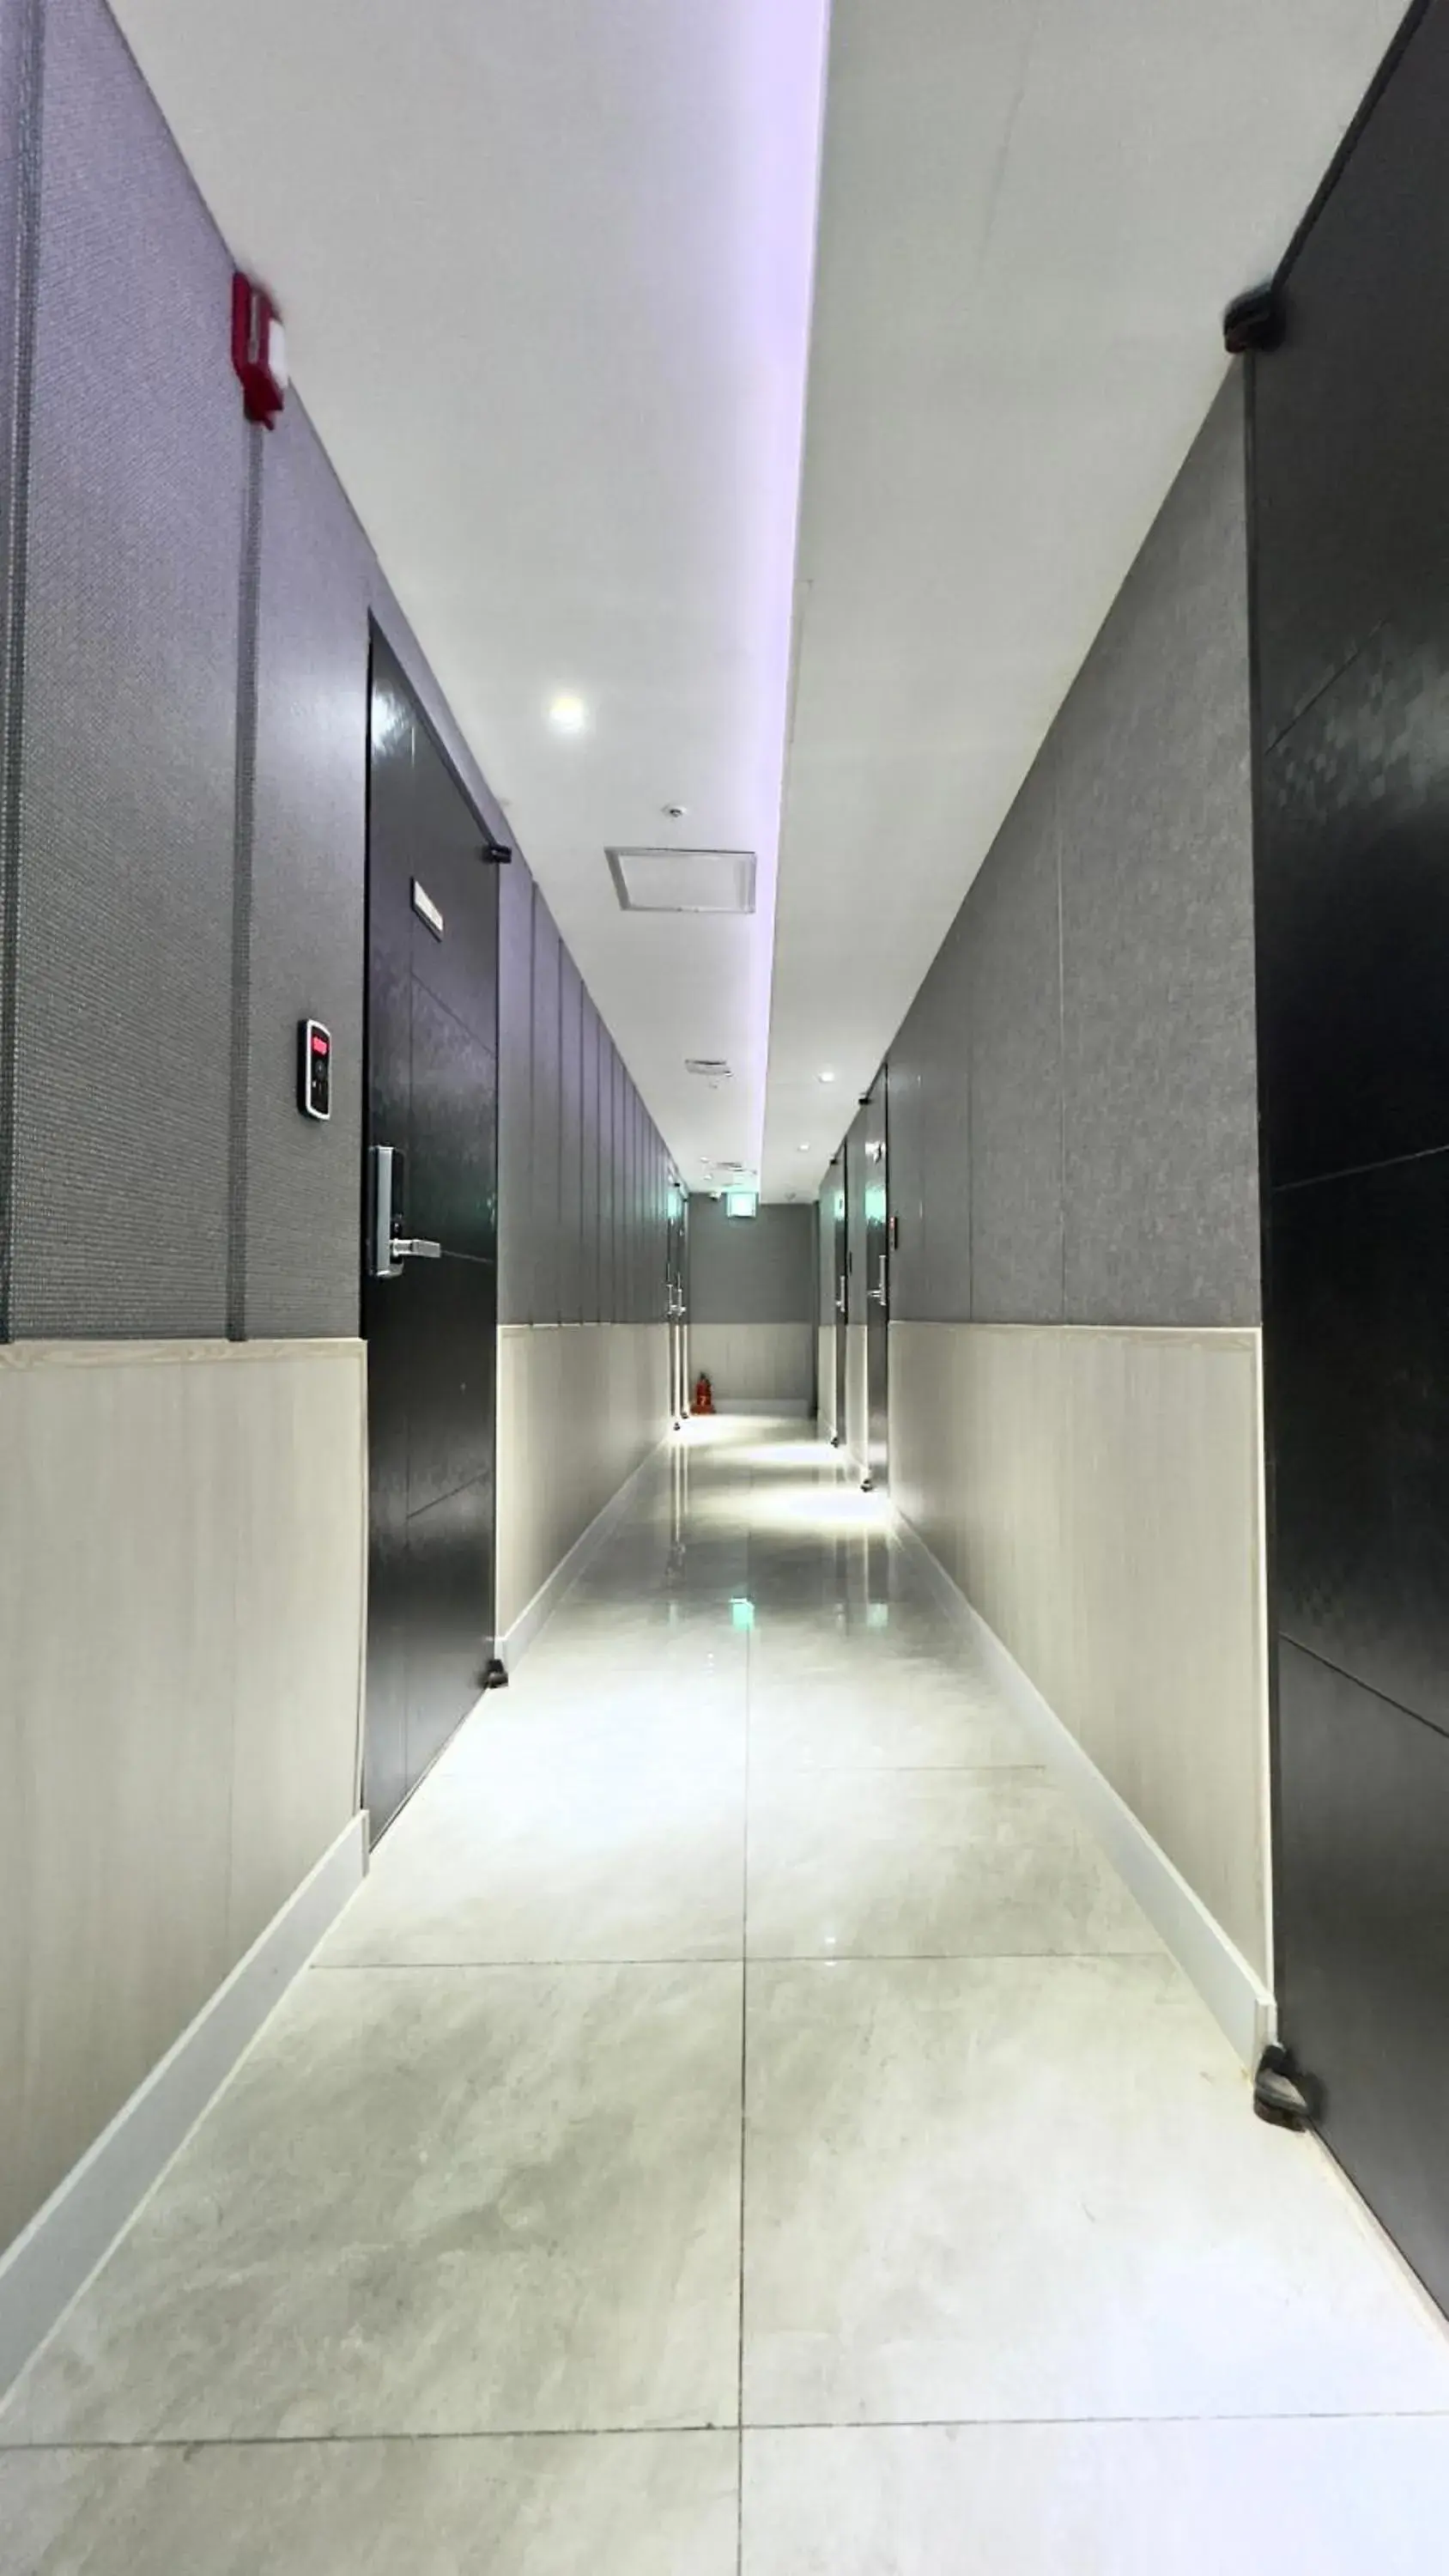 soundproof in MyeongDong New Stay Inn